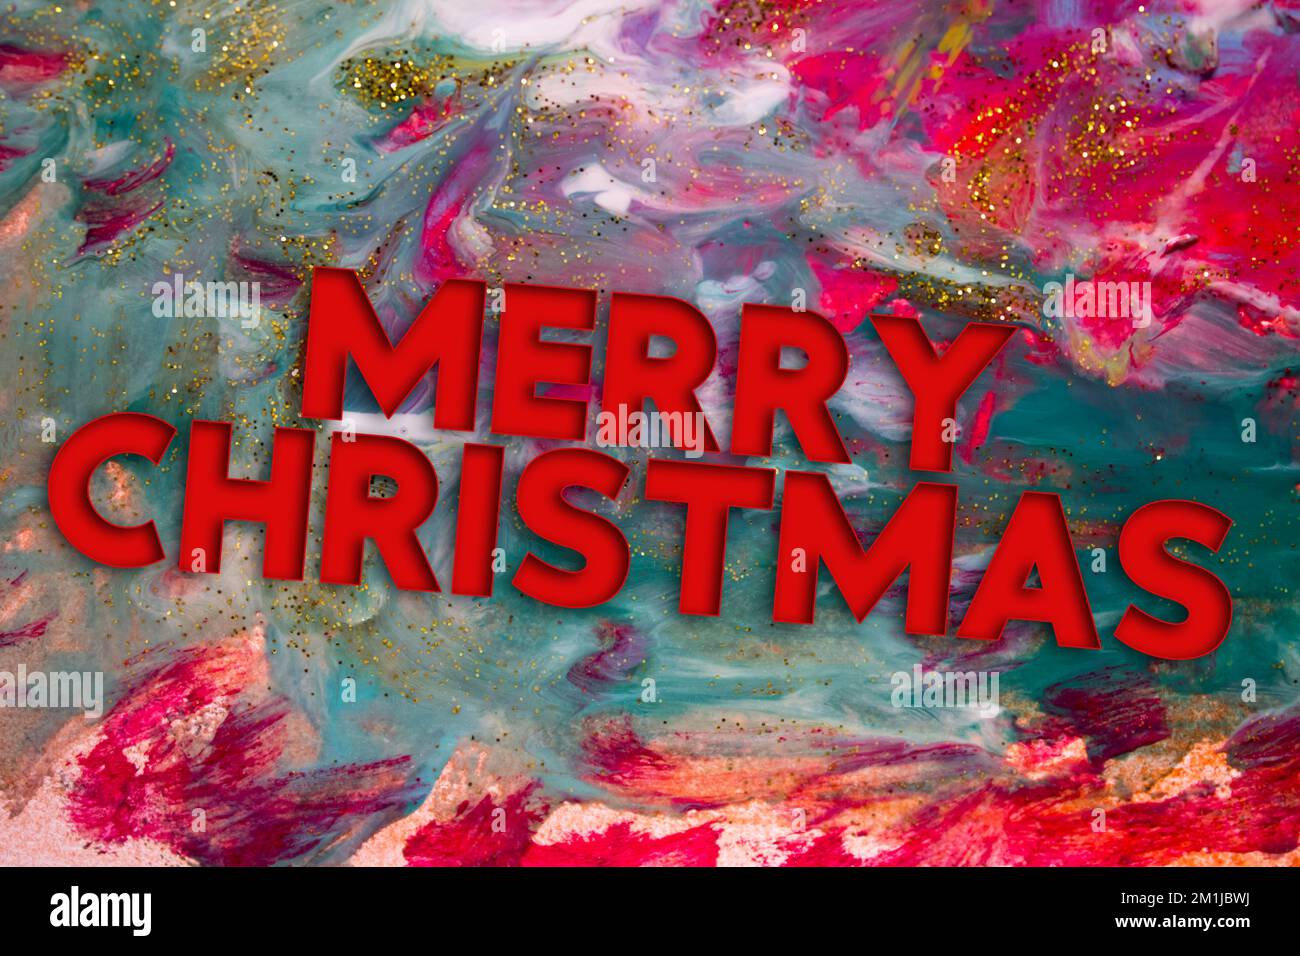 Abstract Natural Luxury art, fluid painting with Merry Christmas text, alcohol ink technique. Image incorporates the swirls of marble granite. Stock Photo